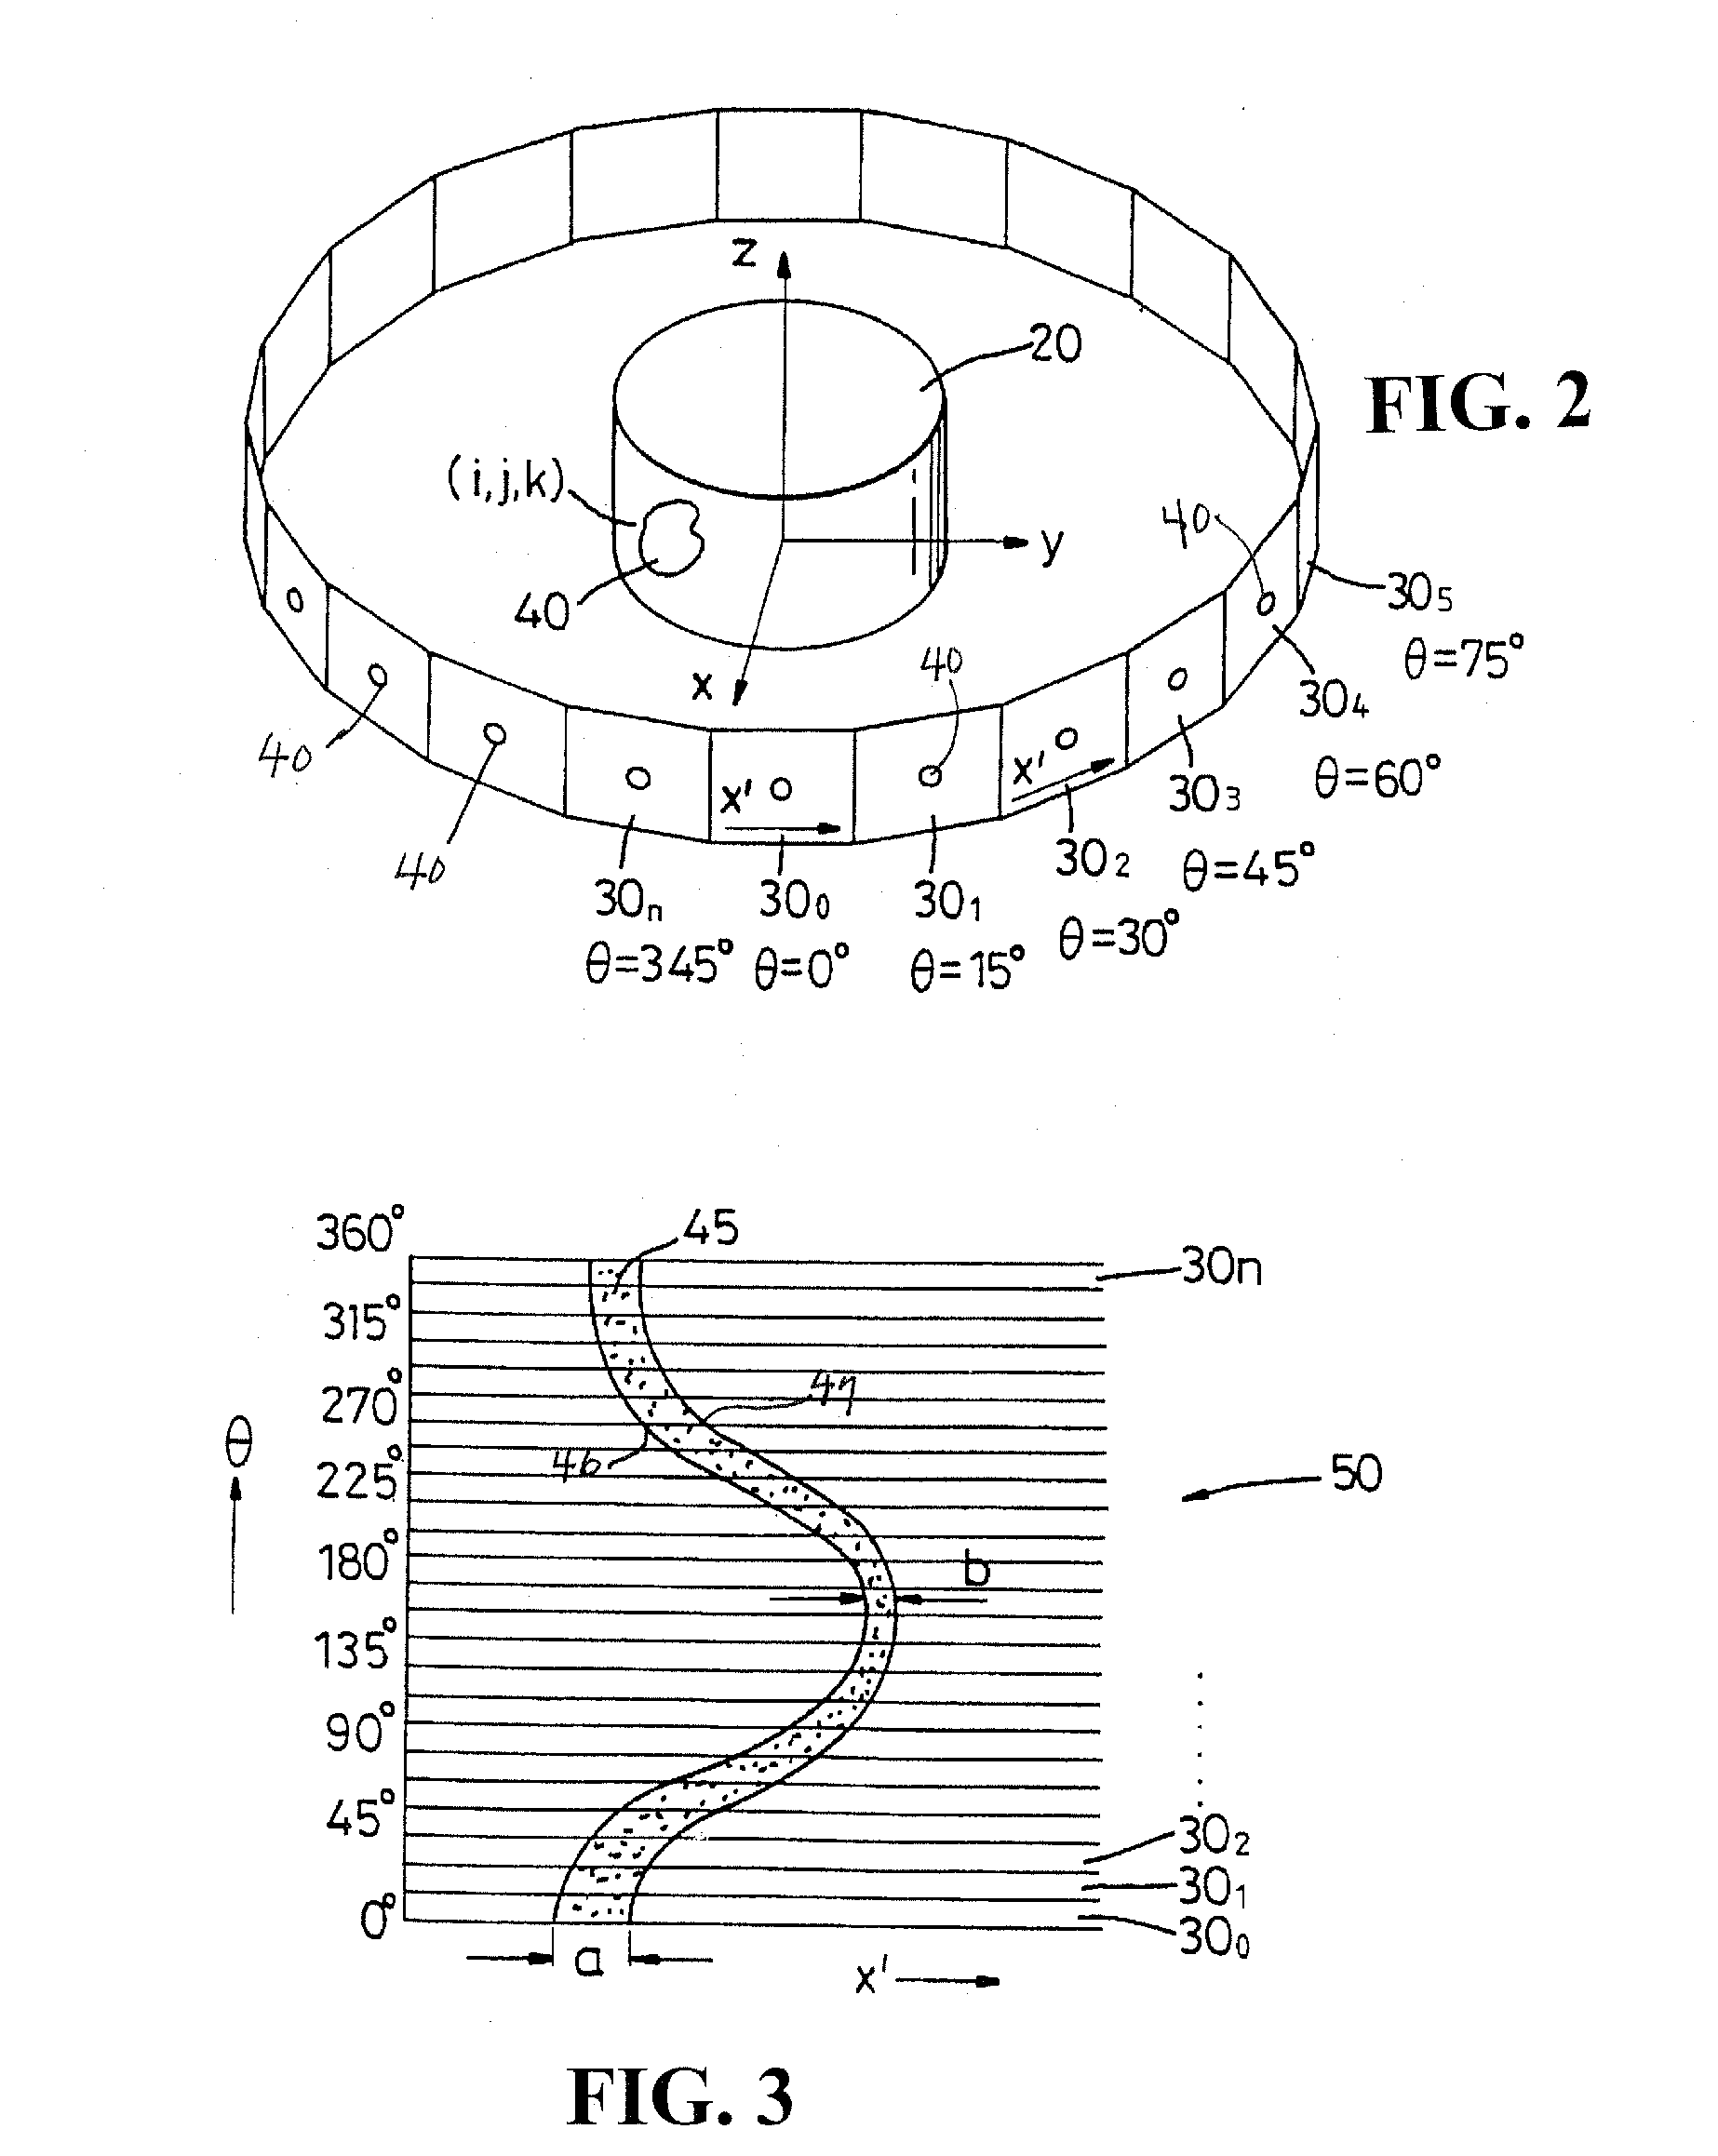 Object Identifying System for Segmenting Unreconstructed Data in Image Tomography